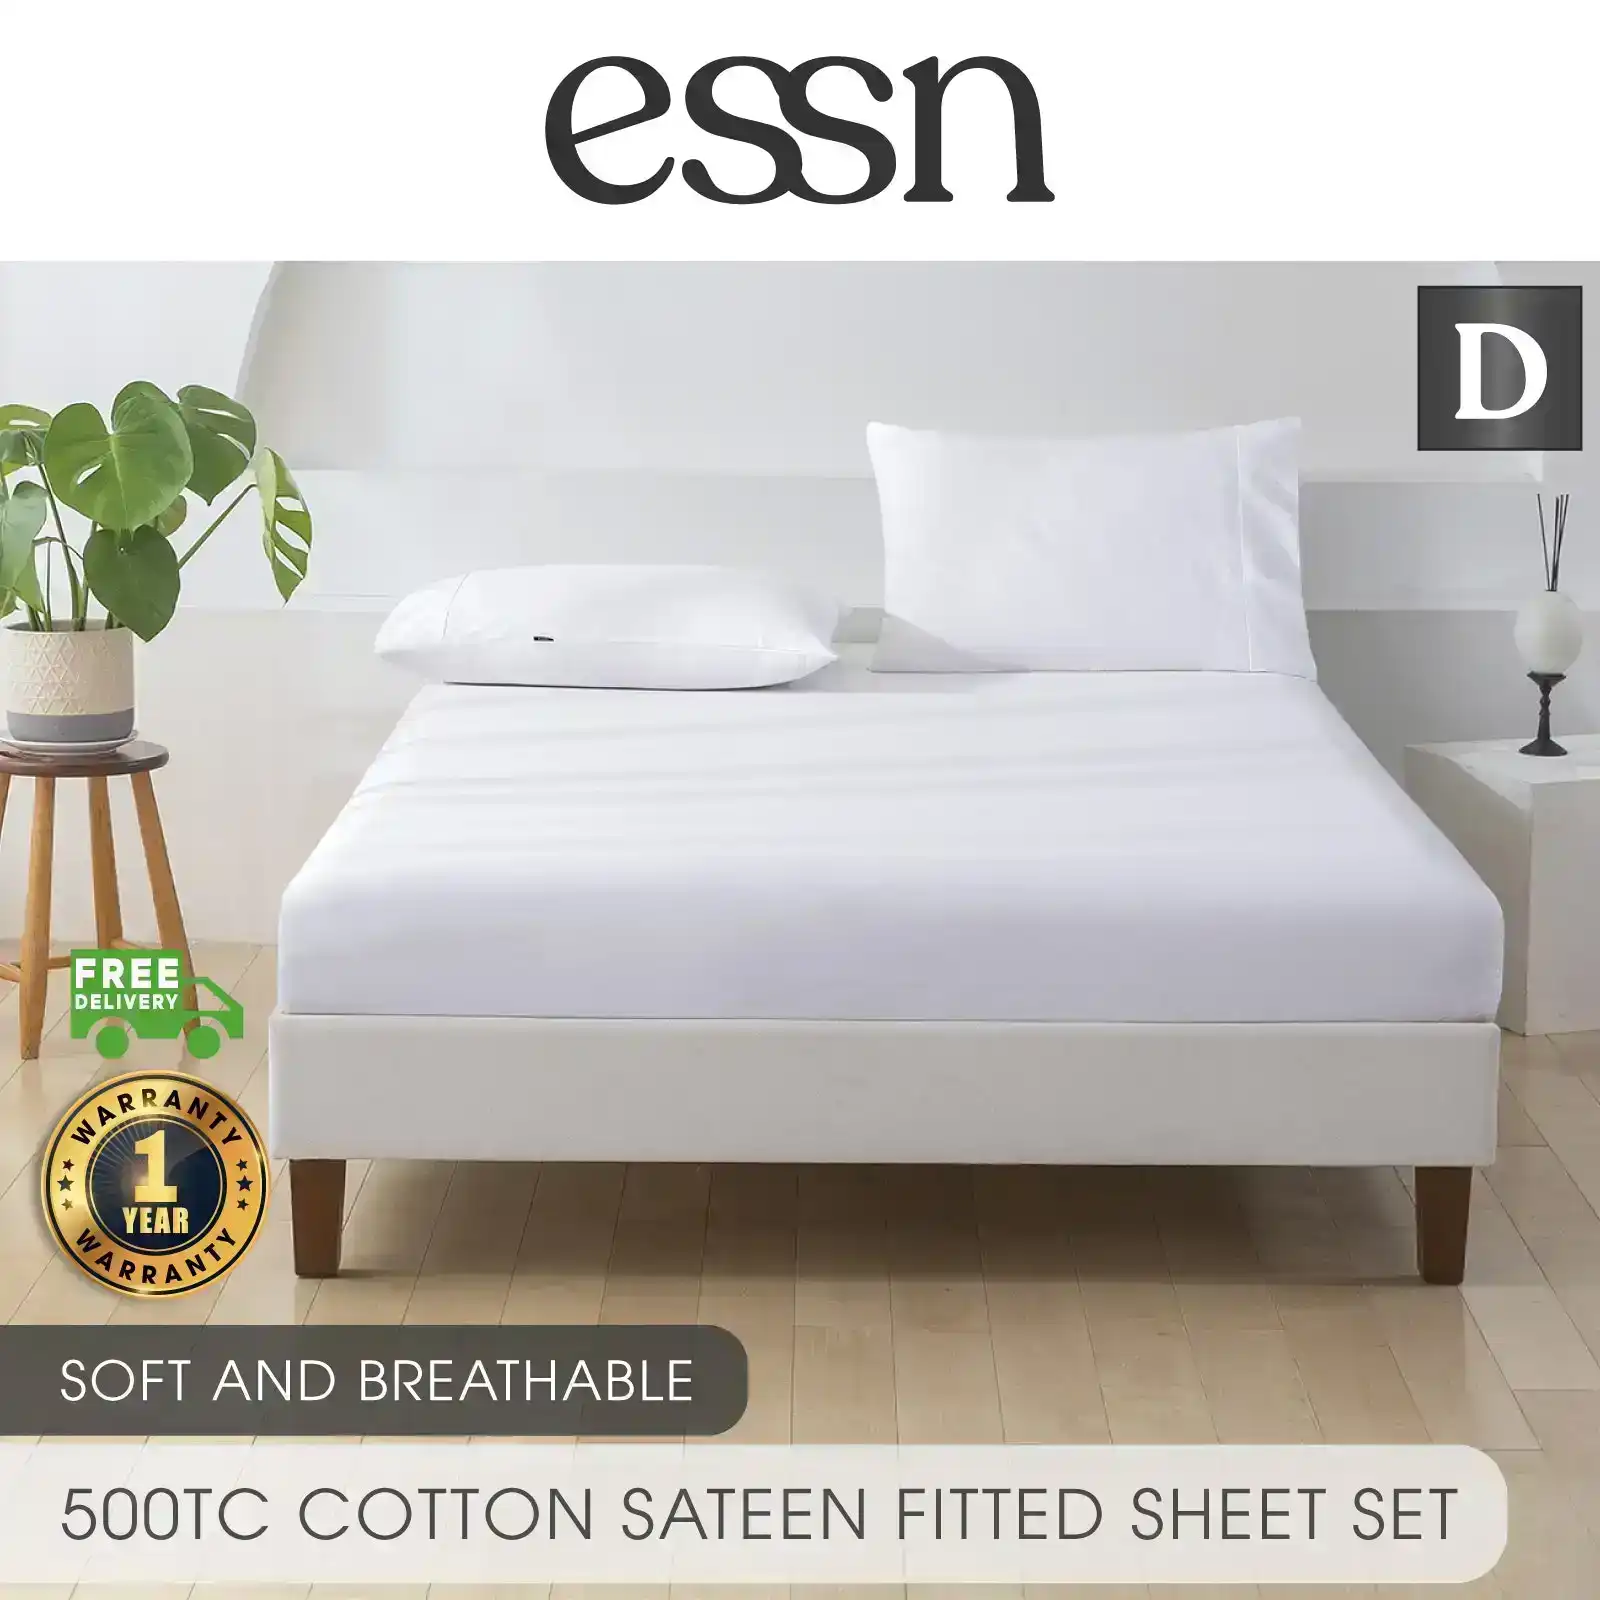 ESSN 500TC Cotton Sateen Fitted Sheet Set White Double Bed